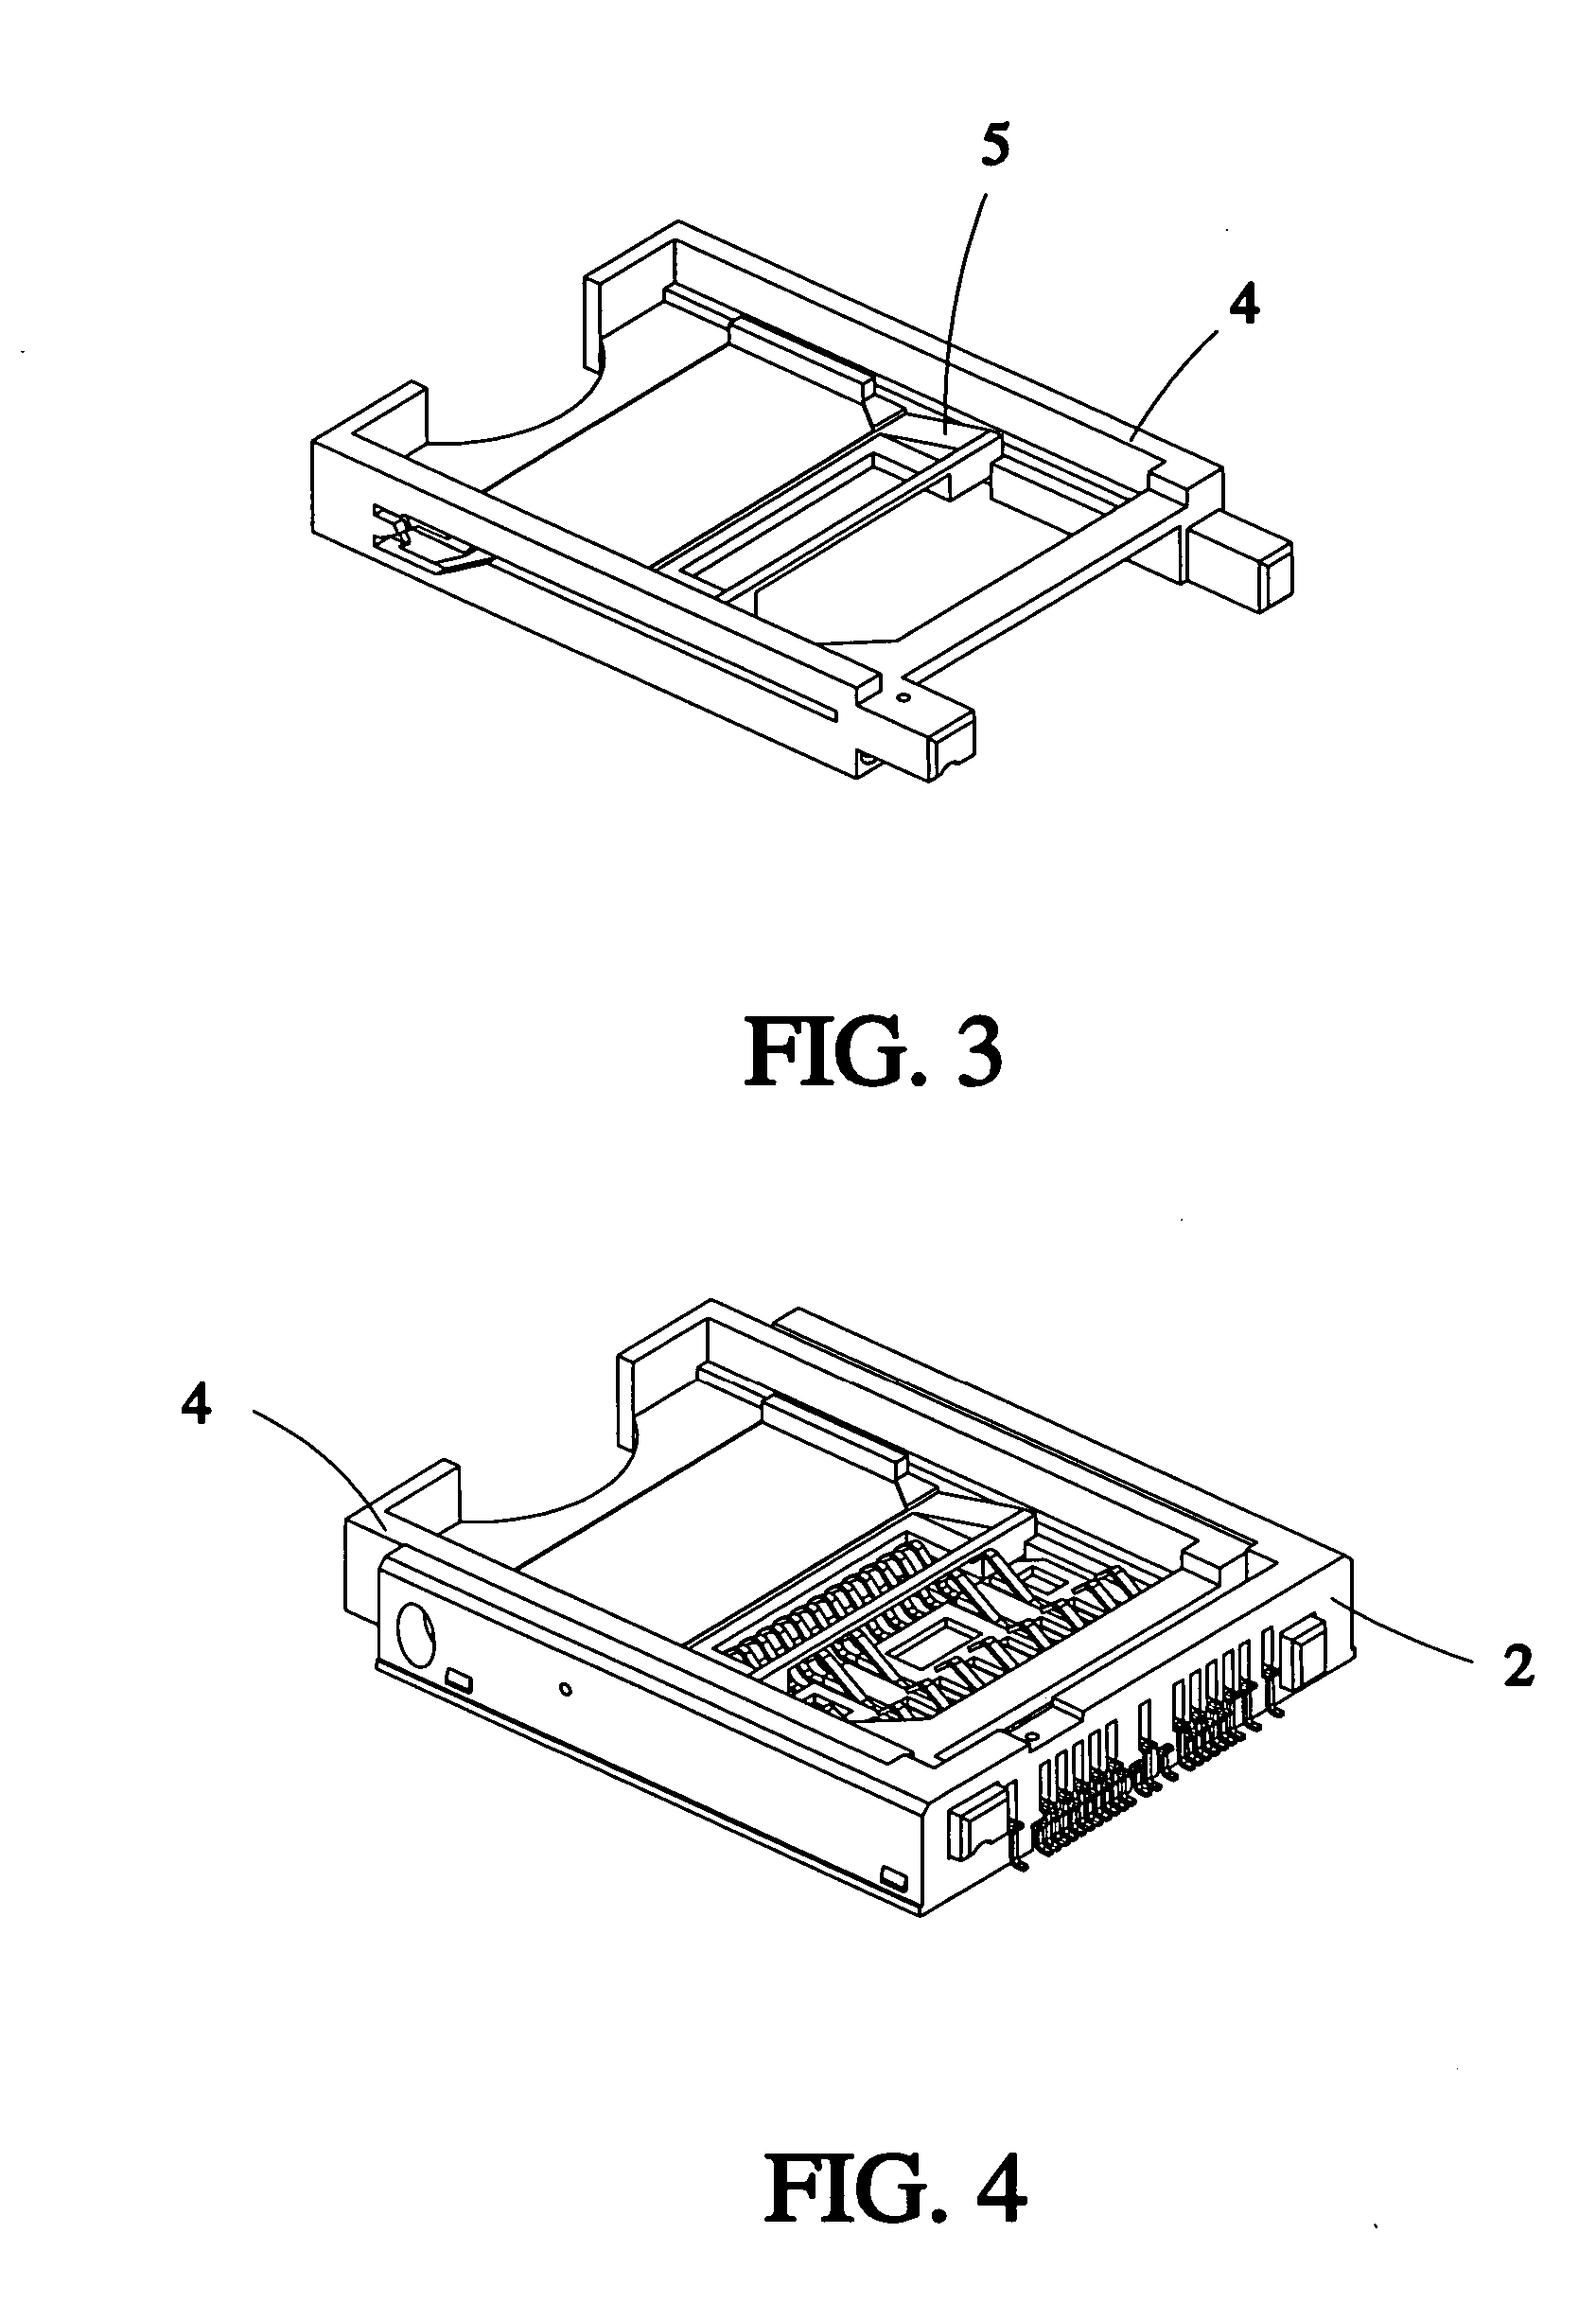 Drawer-type all-in-one card connector